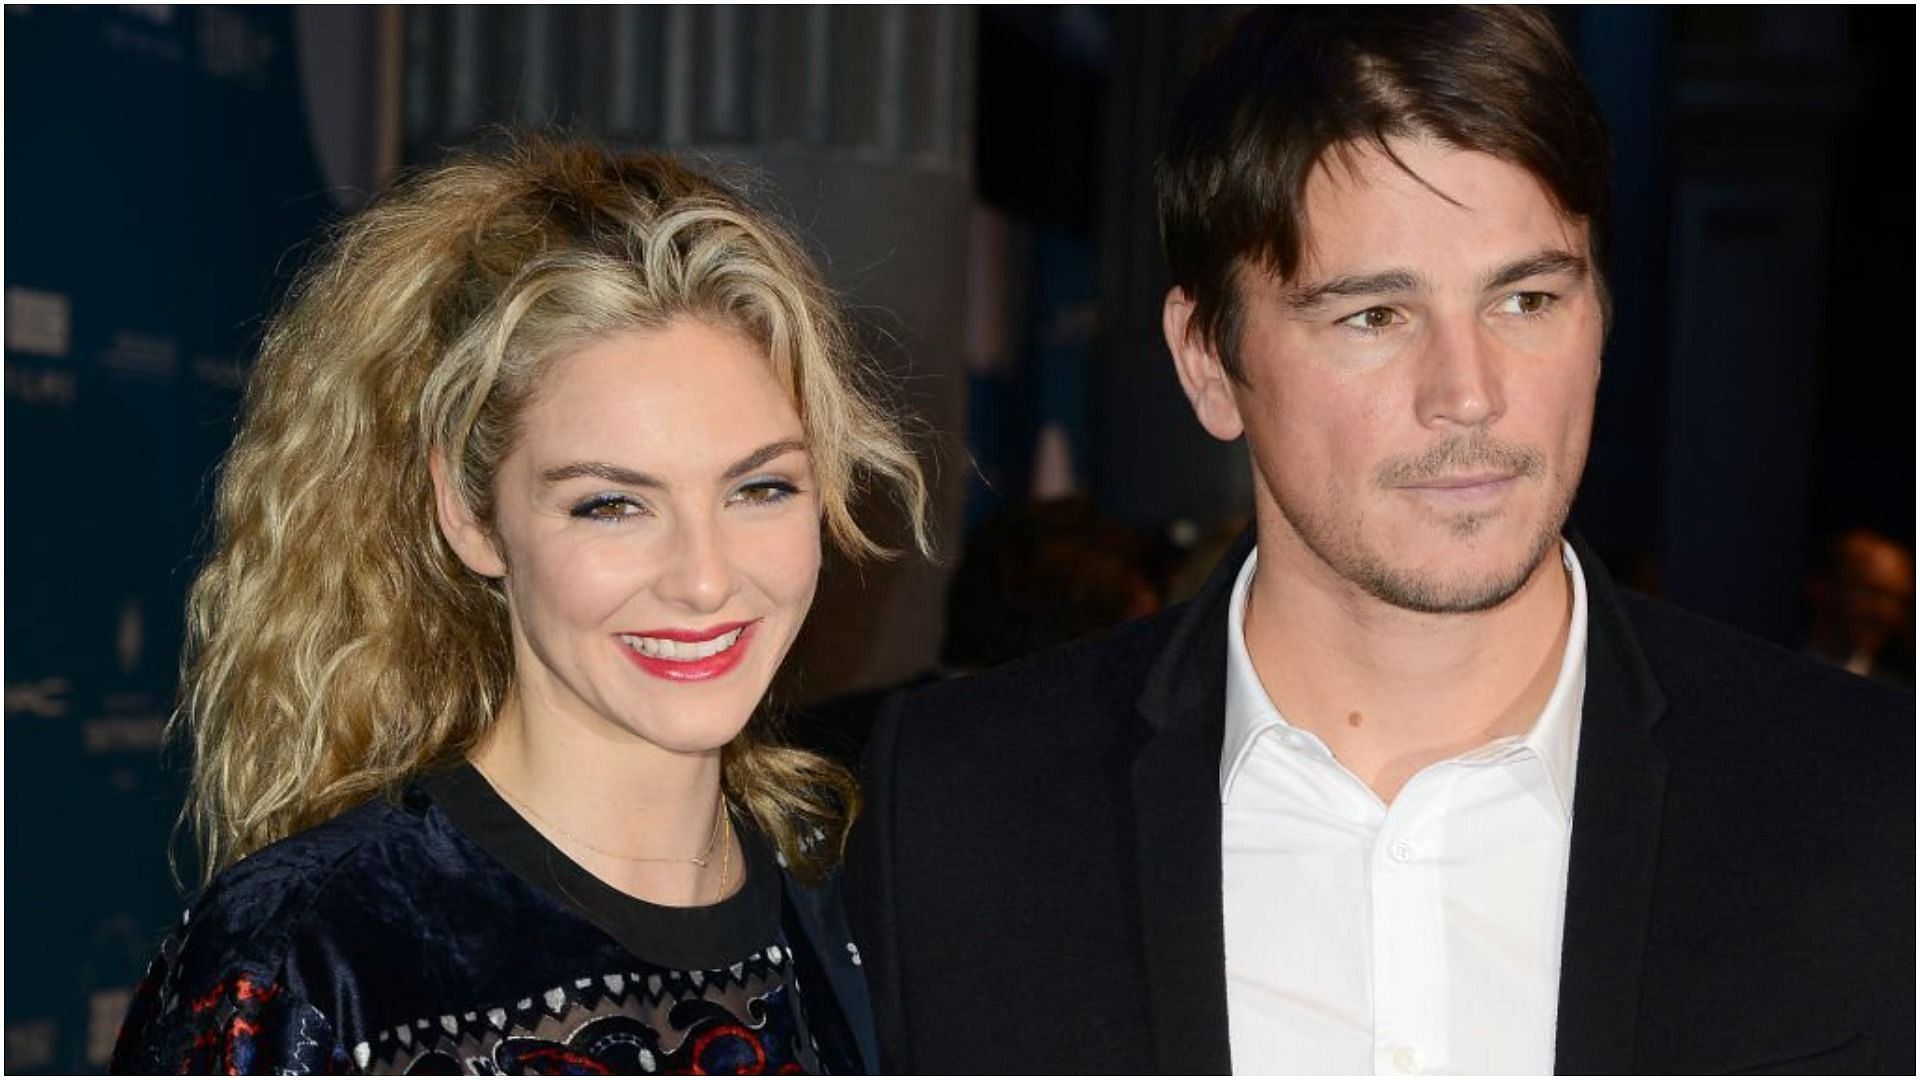 Josh Hartnett and Tamsin Egerton tied the knot a long time ago (Image via Dave J Hogan/Getty Images)